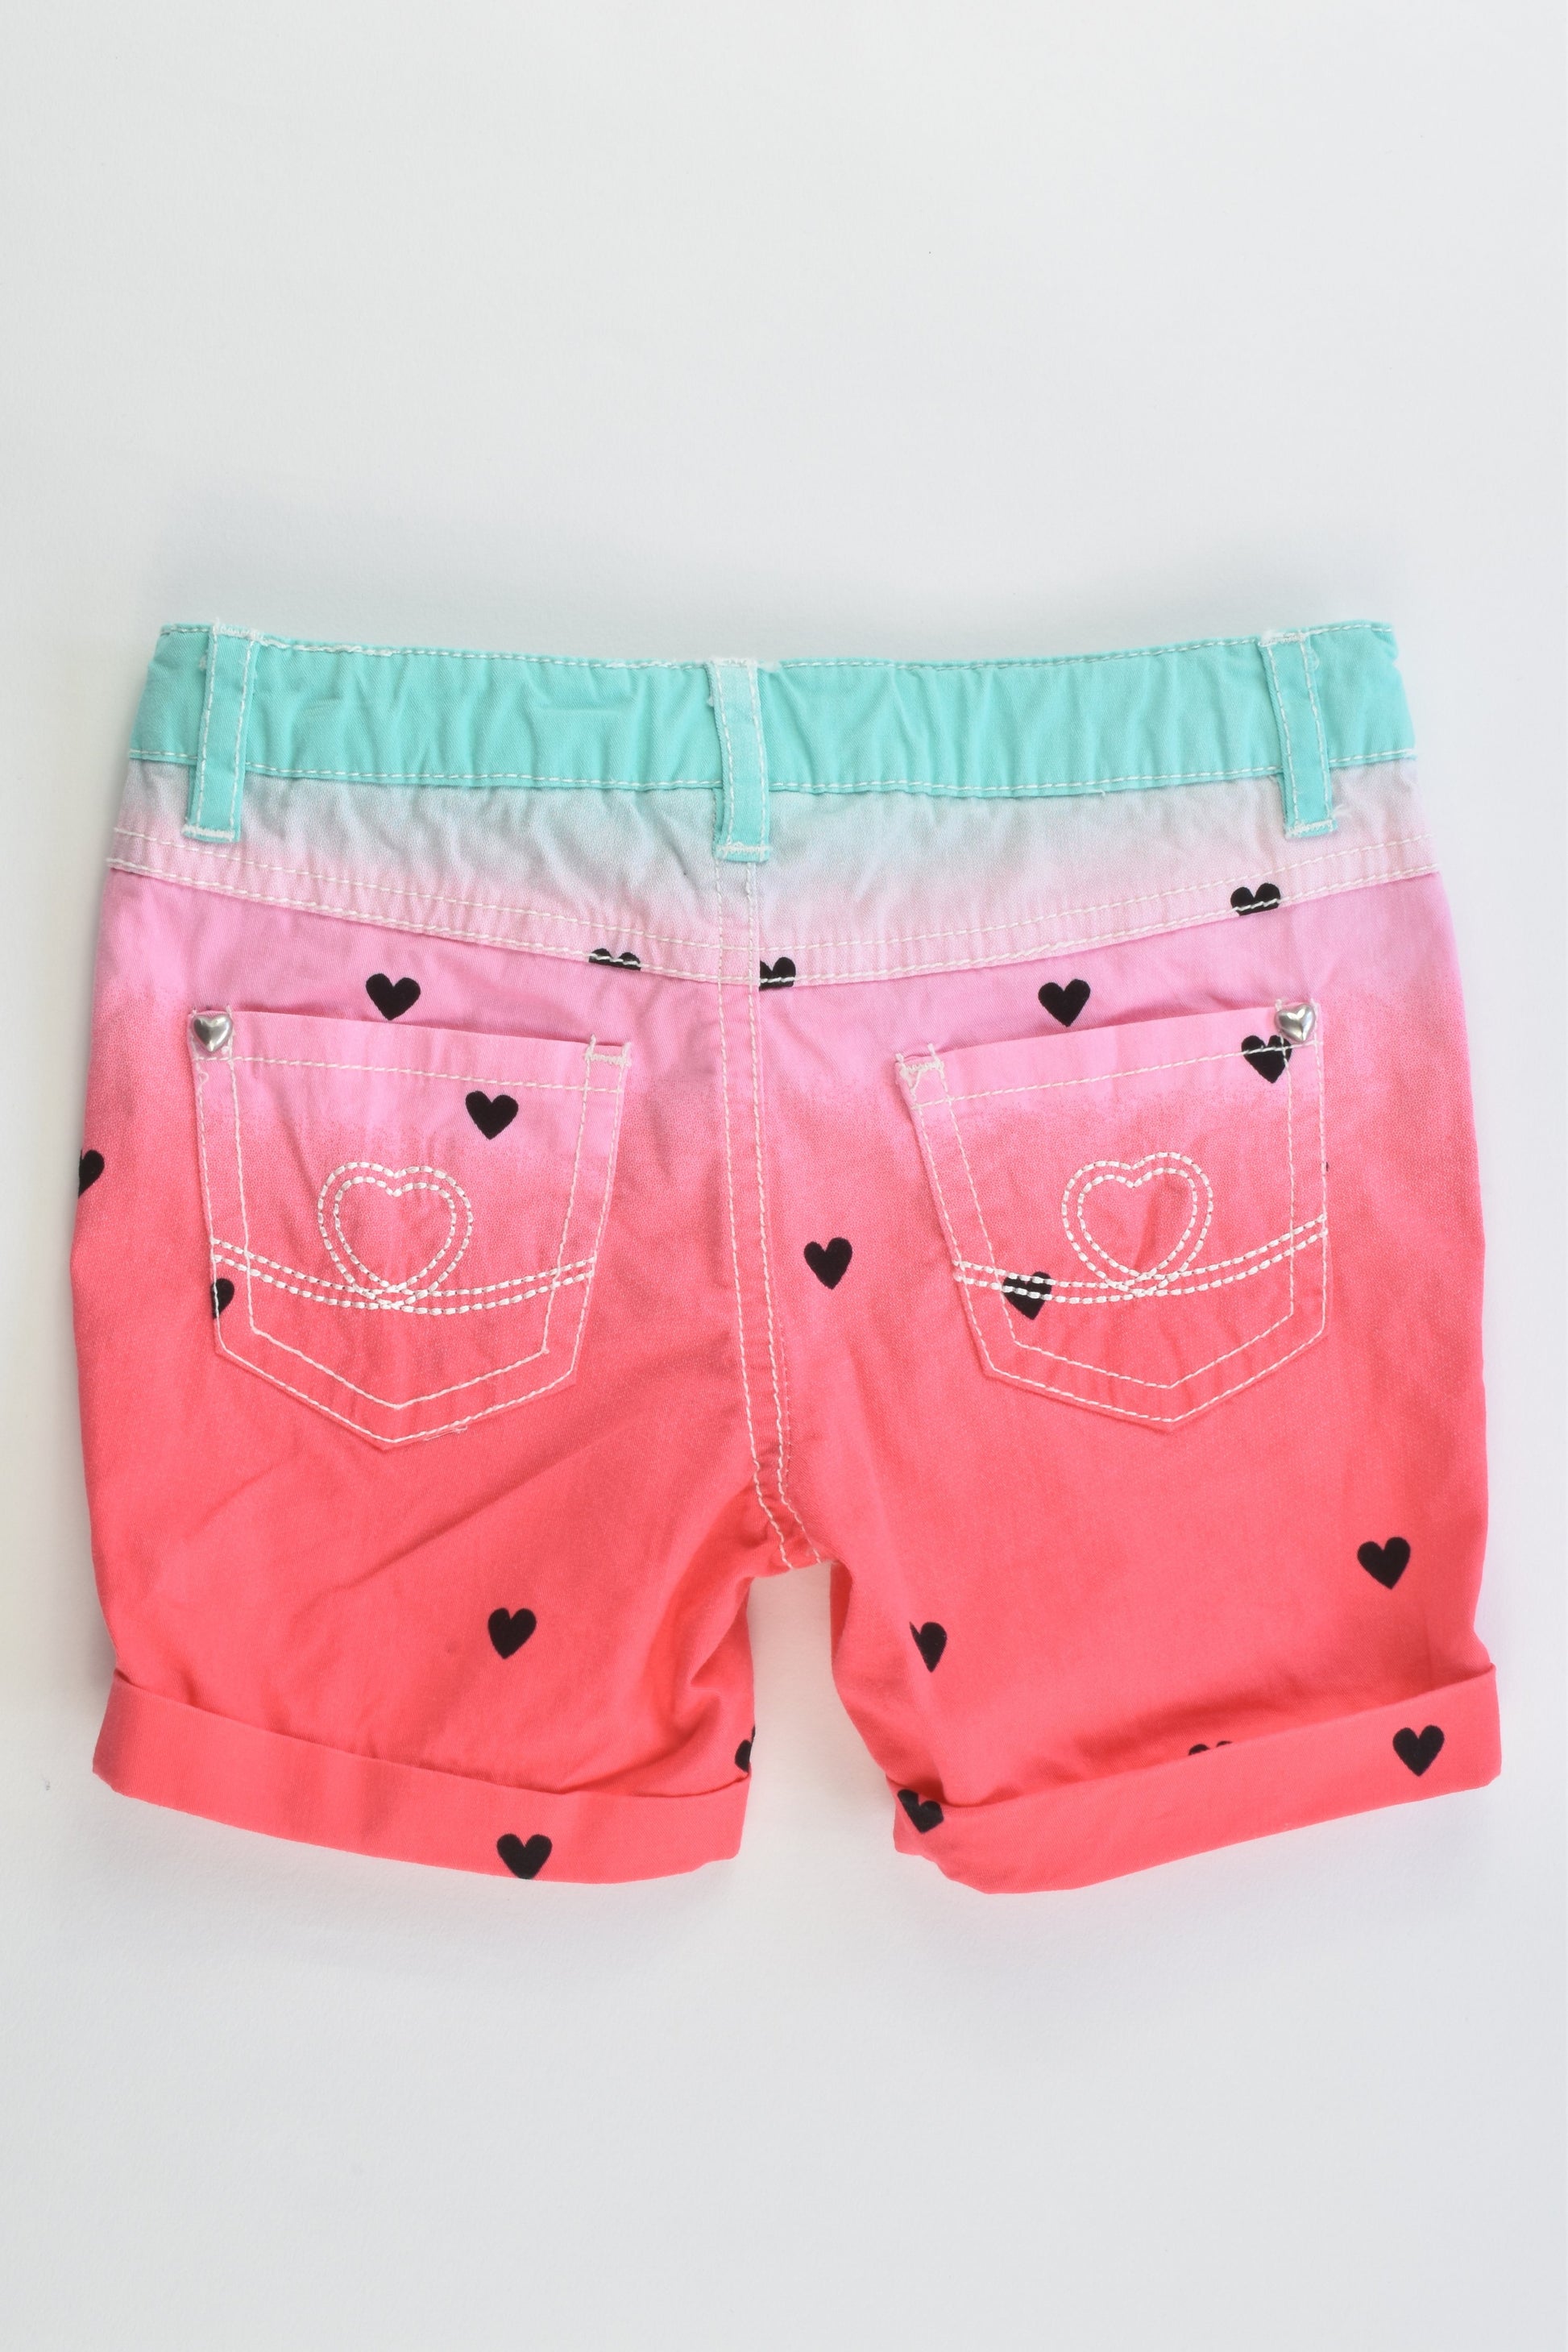 Target Size 2 Stretchy Watermelon Shorts